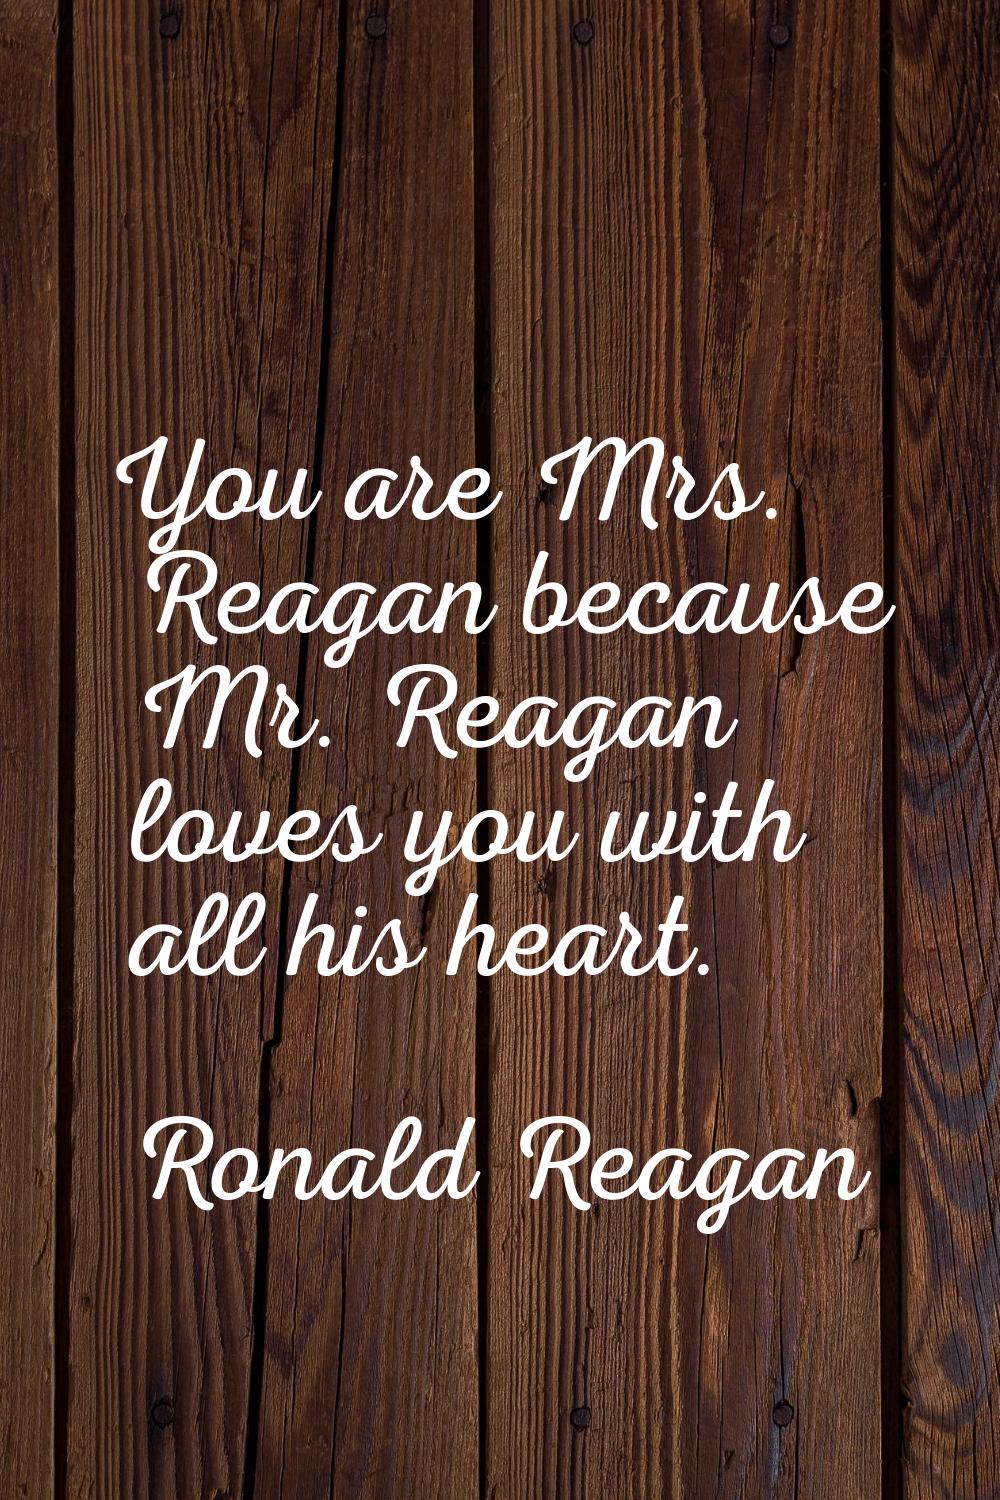 You are Mrs. Reagan because Mr. Reagan loves you with all his heart.